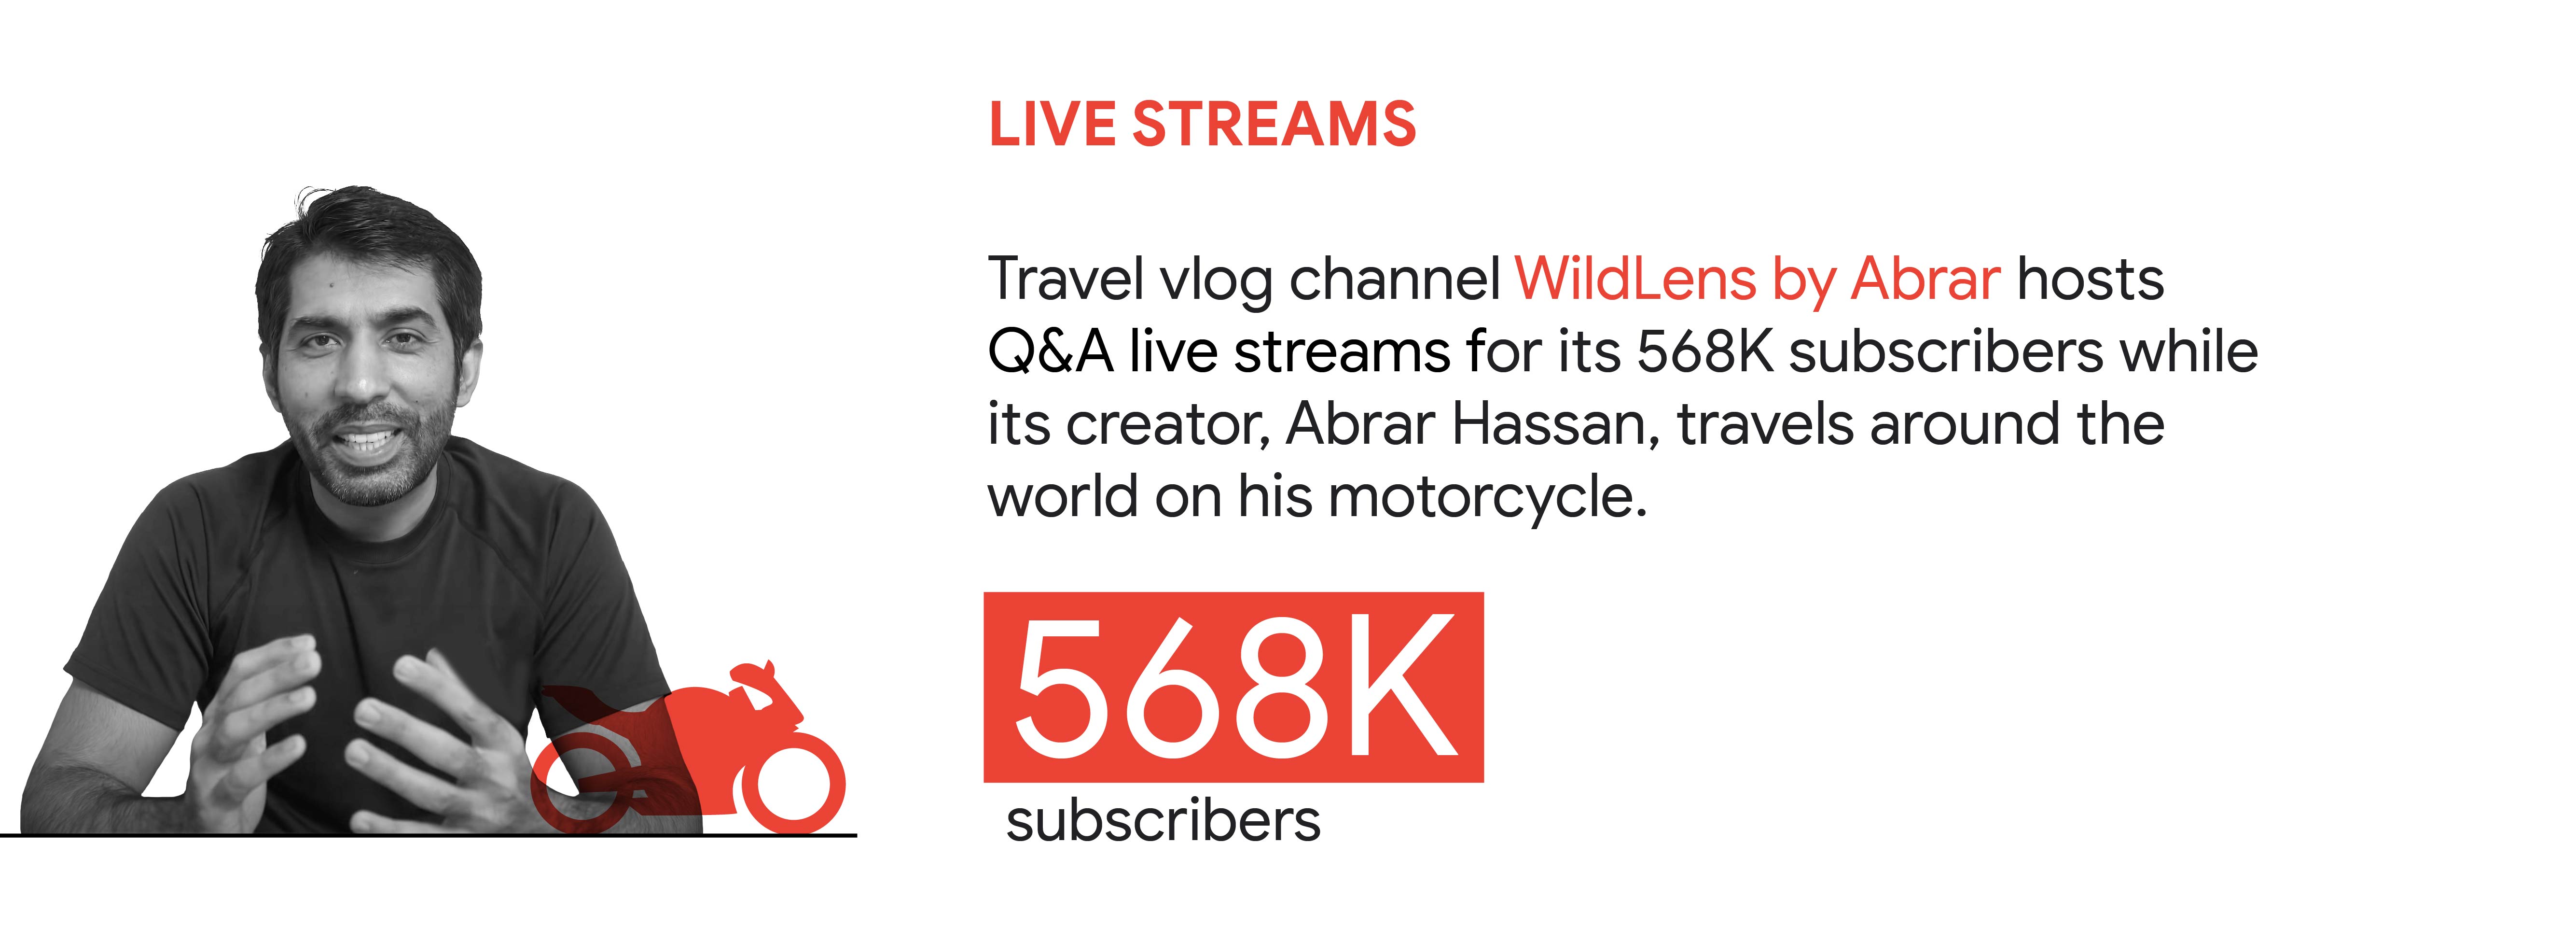 YouTube trend 2: Live streams. In Pakistan, travel vlog channel WildLens by Abrar hosts Q&A live streams for its 568K subscribers while its creator, Abrar Hassan, travels around the world on his motorcycle.